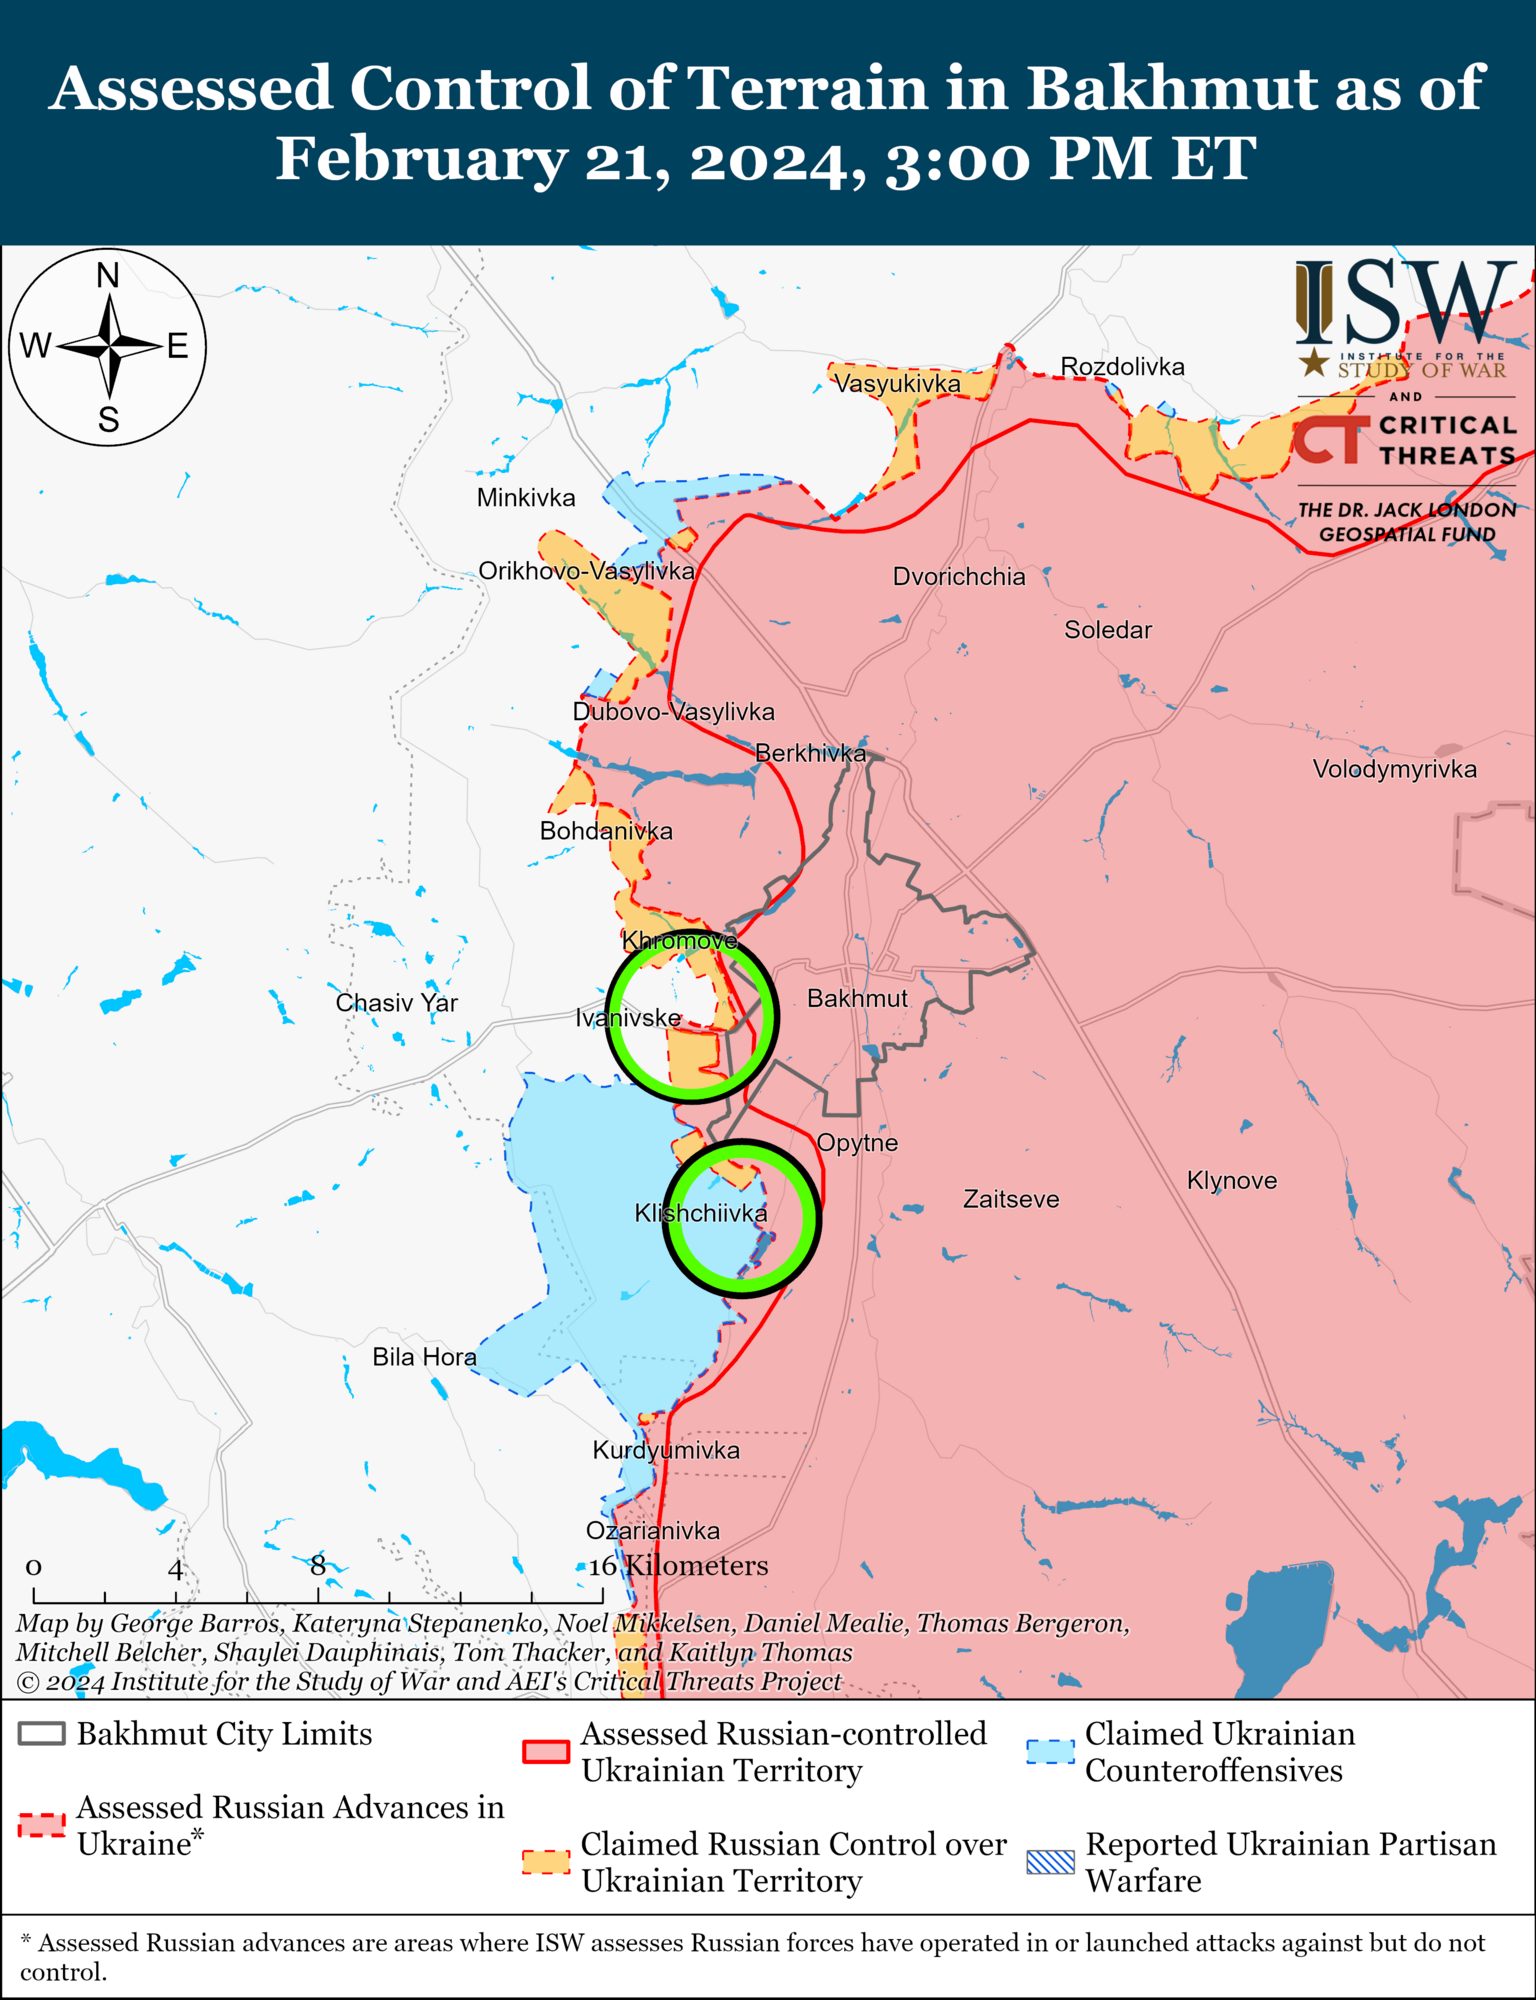 Occupants made minor advances in Zaporizhzhia, Ukrainian Armed Forces hold positions in Krynky: ISW analysis of hostilities. Map